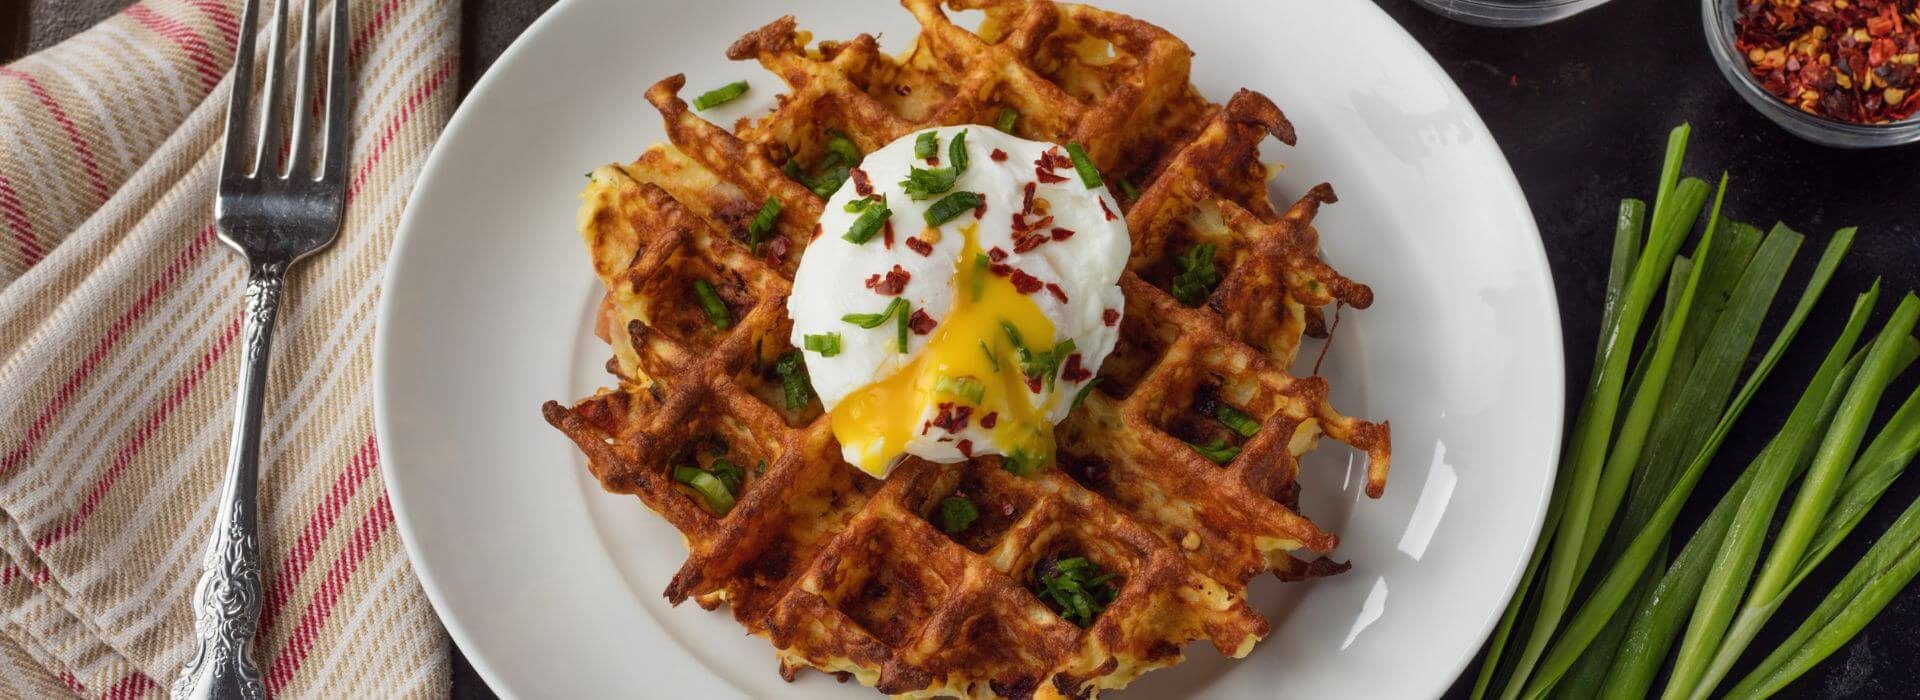 Crispy waffle with a poached egg, greens, a colorful cloth napkin, and a sliver fork.